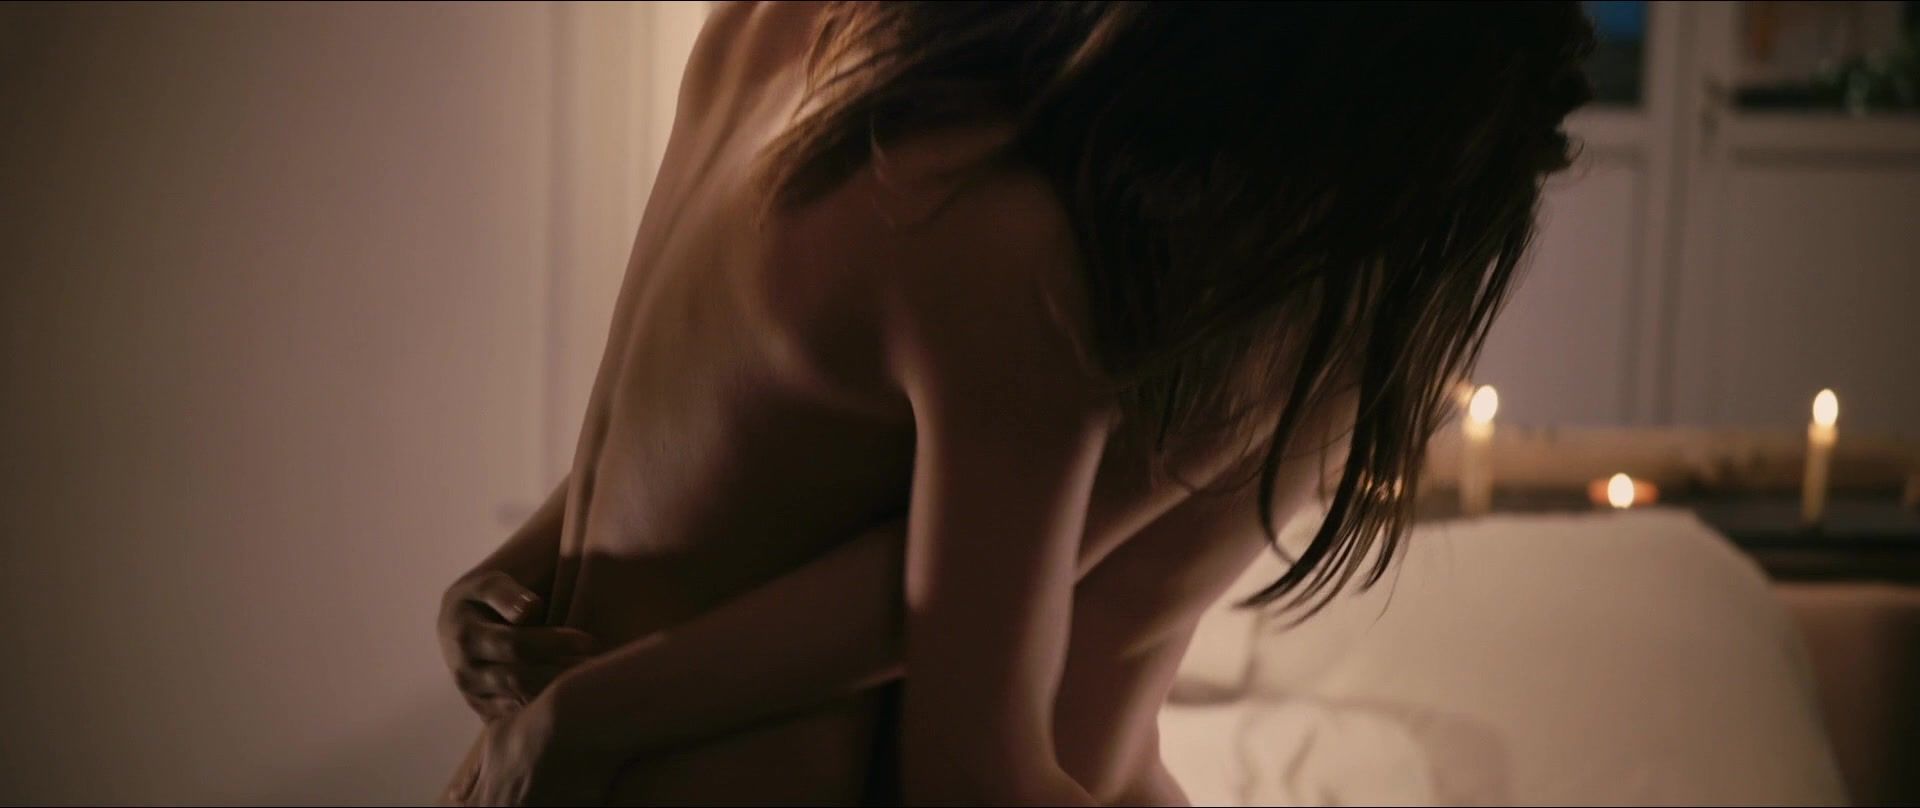 Missionary Adele Exarchopoulos & Léa Seydoux - Blue Is The Warmest Color (2013) Ink